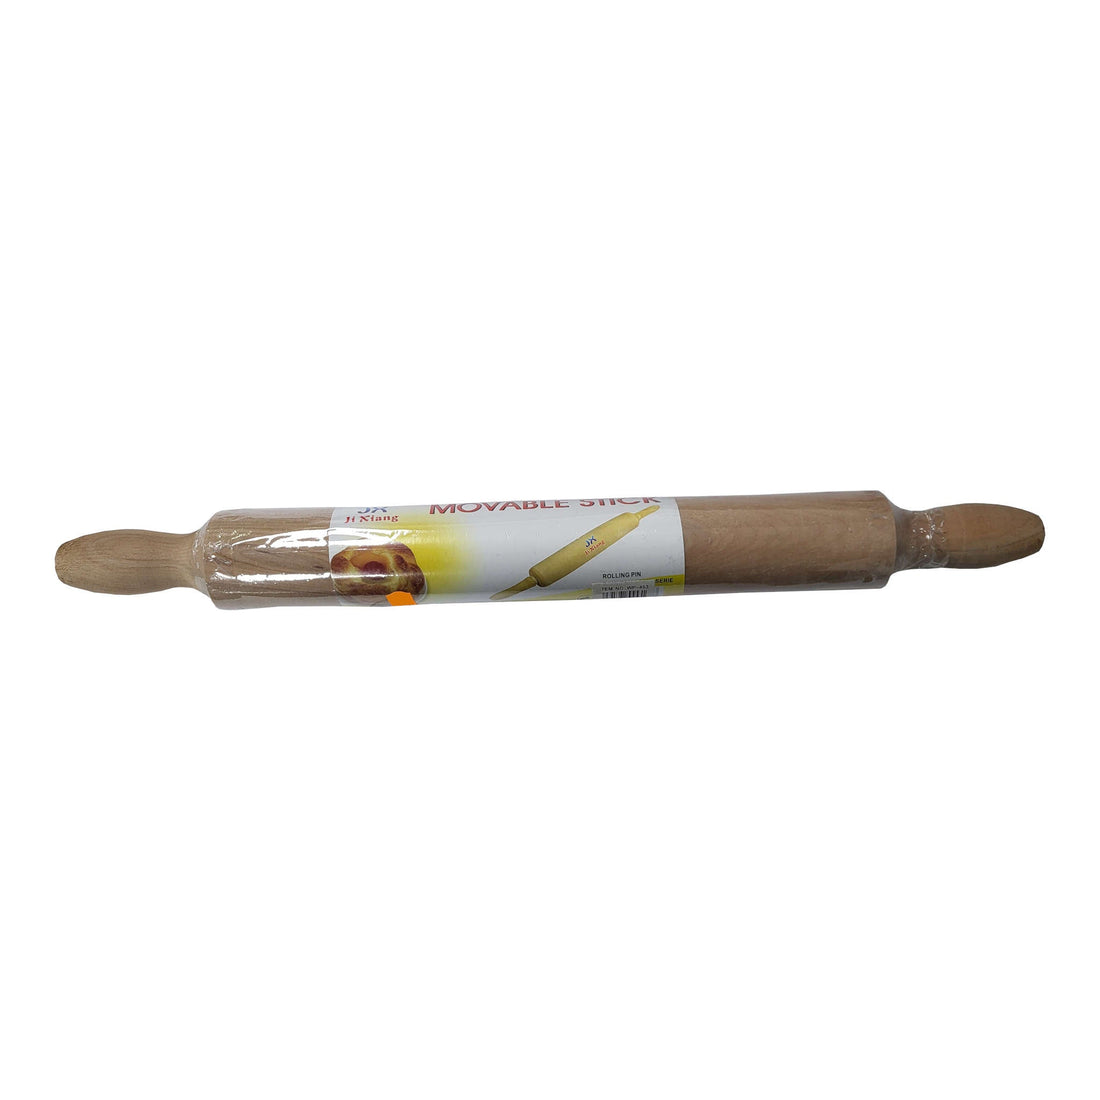 Large Wooden Rolling Pin